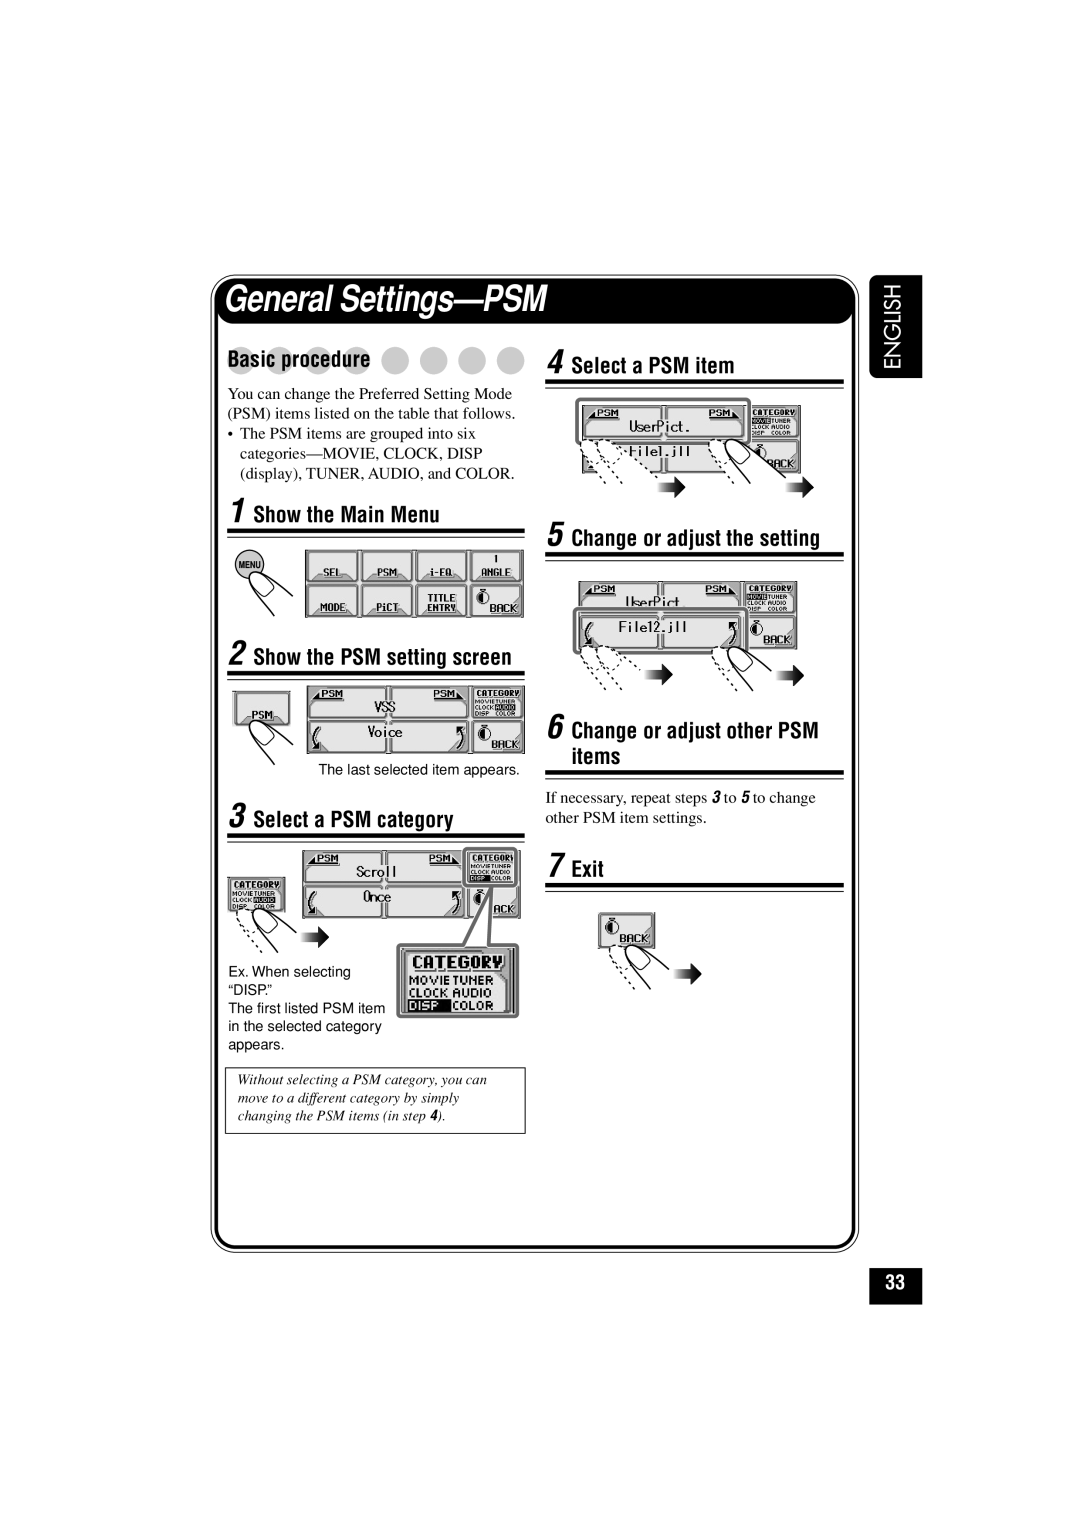 JVC KD-LHX501 General Settings—PSM, Select a PSM item, Show the Main Menu, Change or adjust the setting, Exit, English 